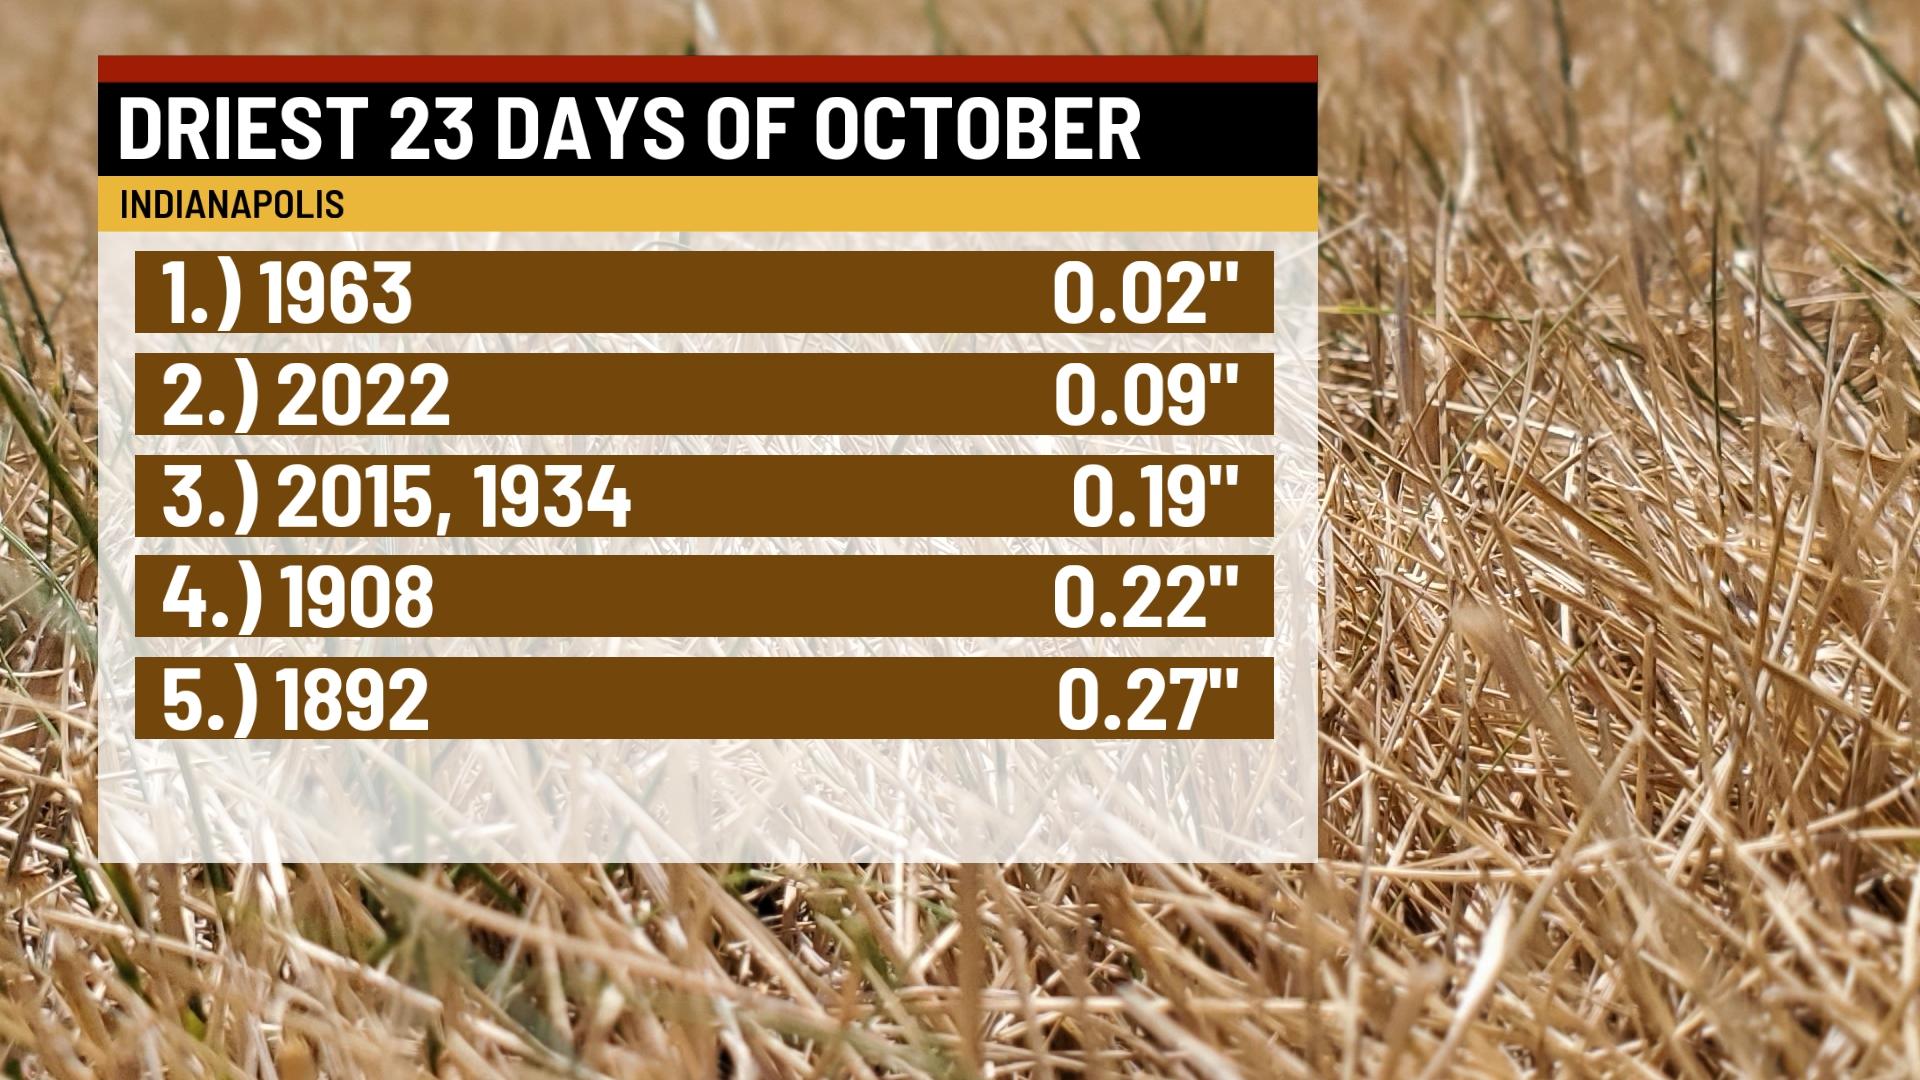 Indianapolis faces driest October in nearly 60 years